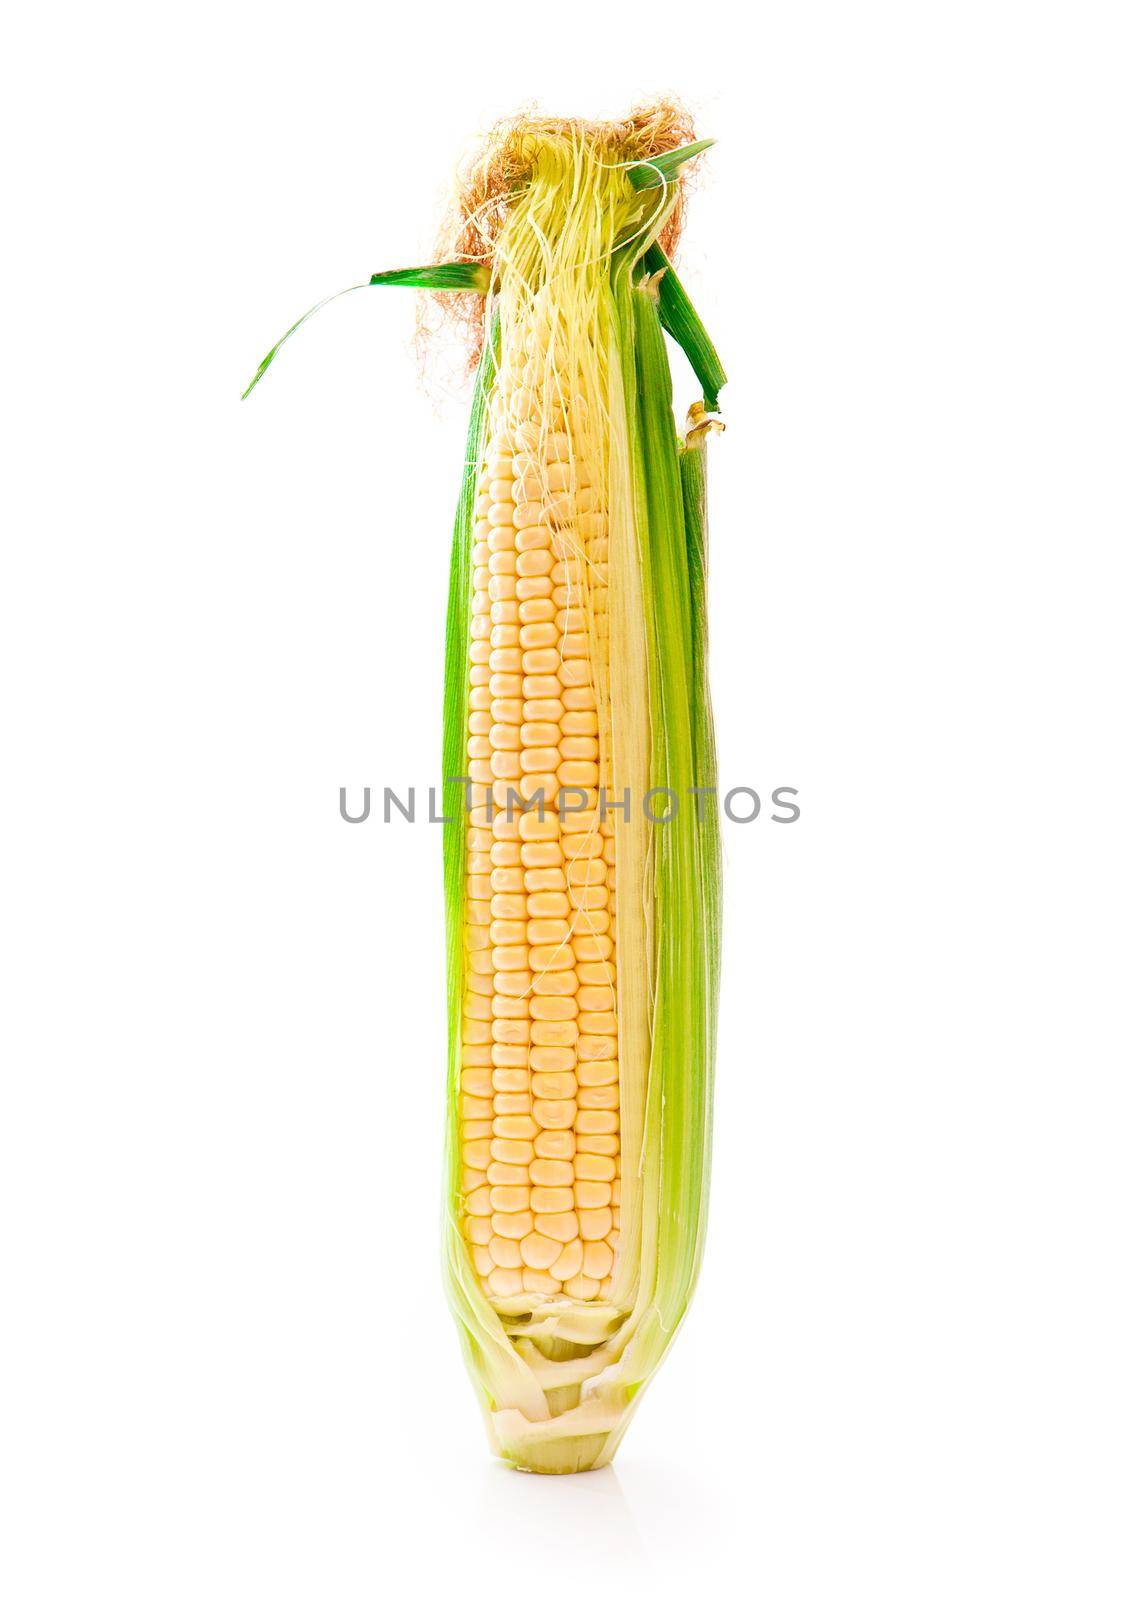 fresh corn vegetable with green leaves isolated on white background